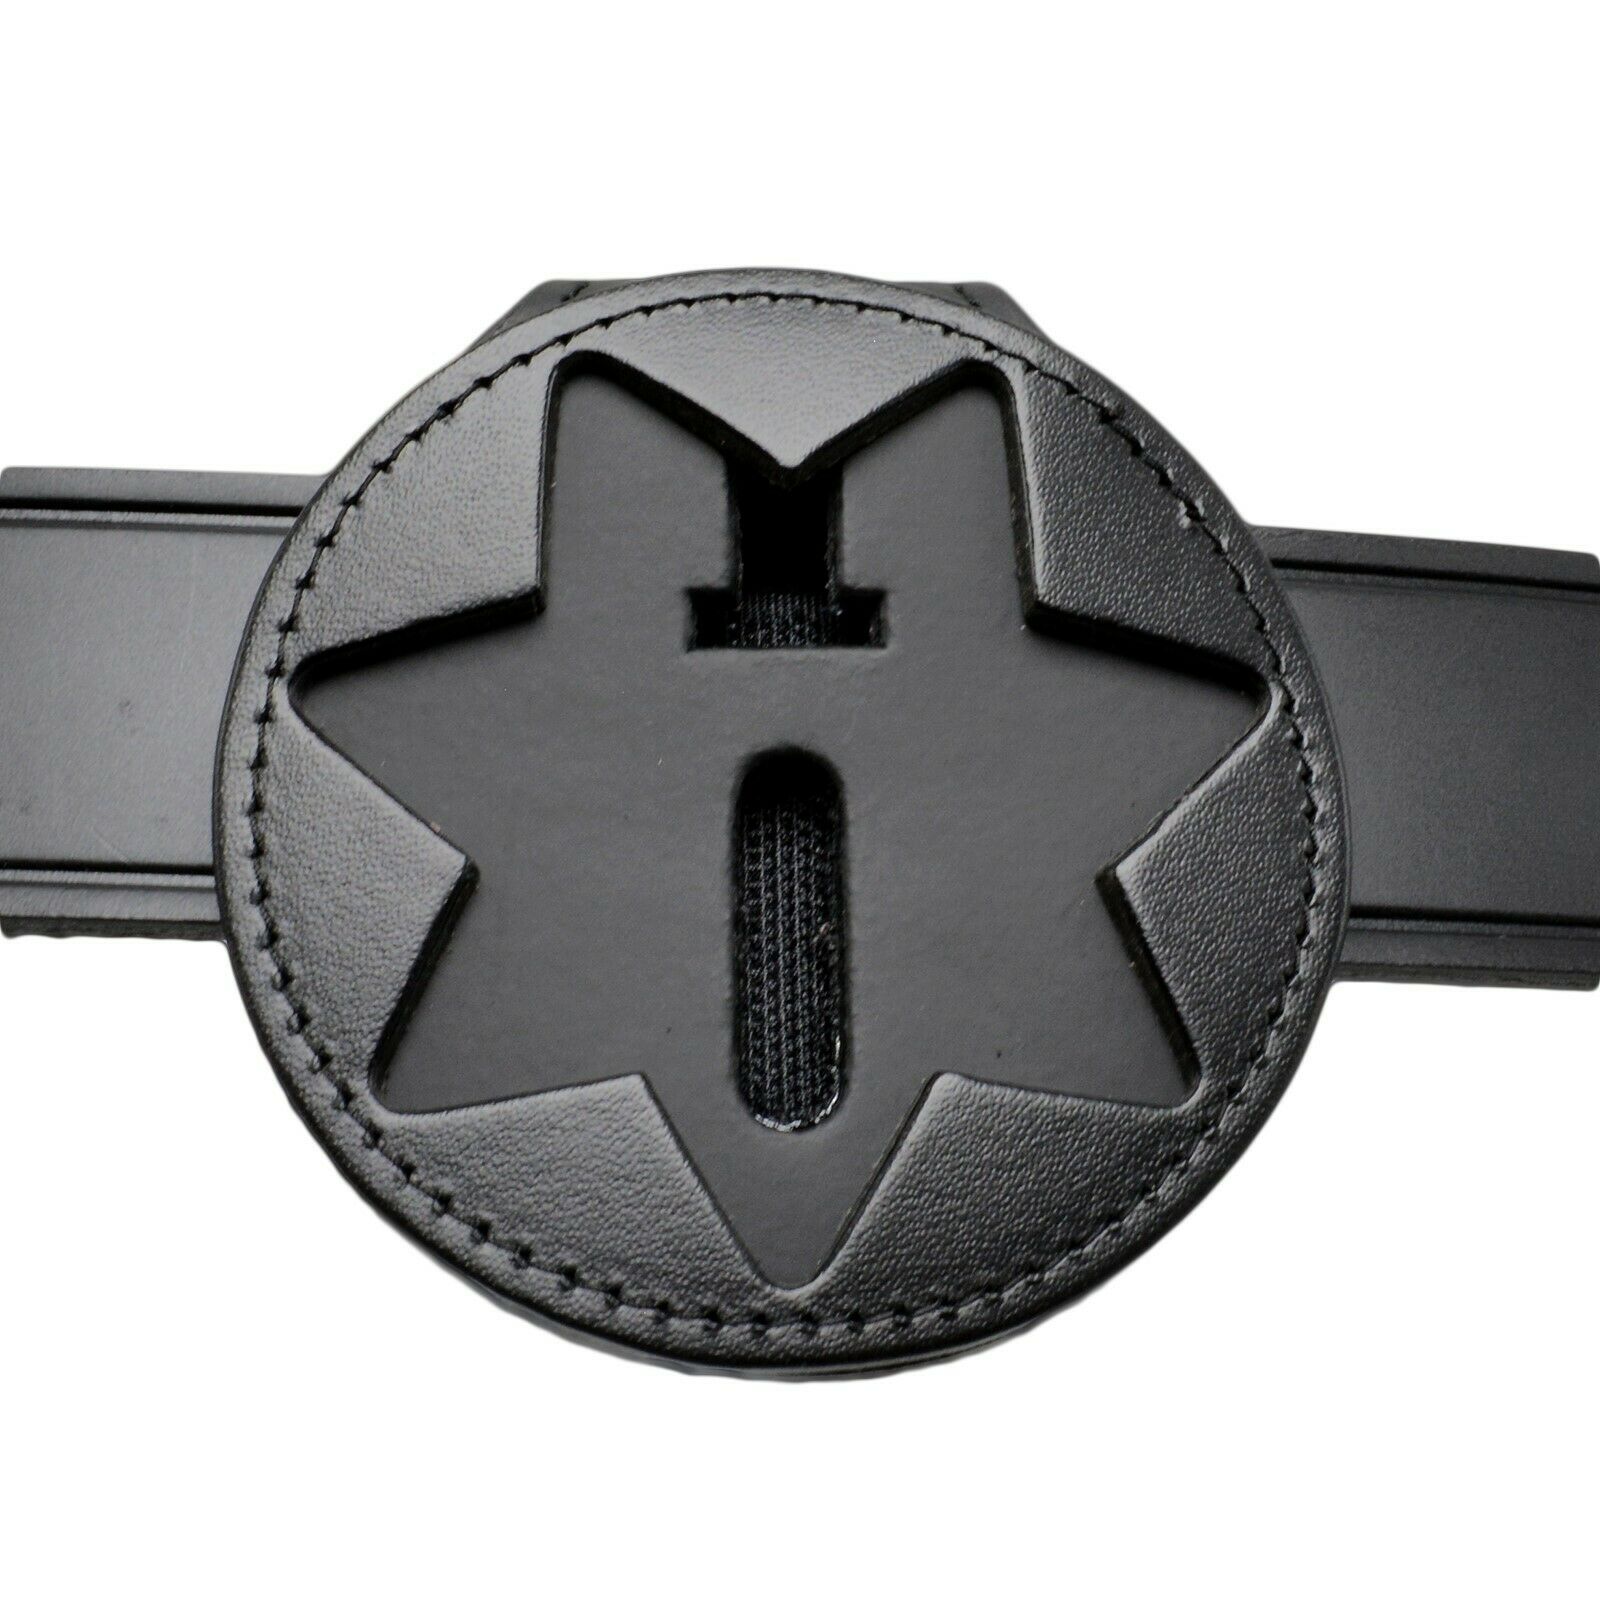 Perfect Fit 7 Point Star Badge Holder Clip On Neck Chain Black Leather Sheriff